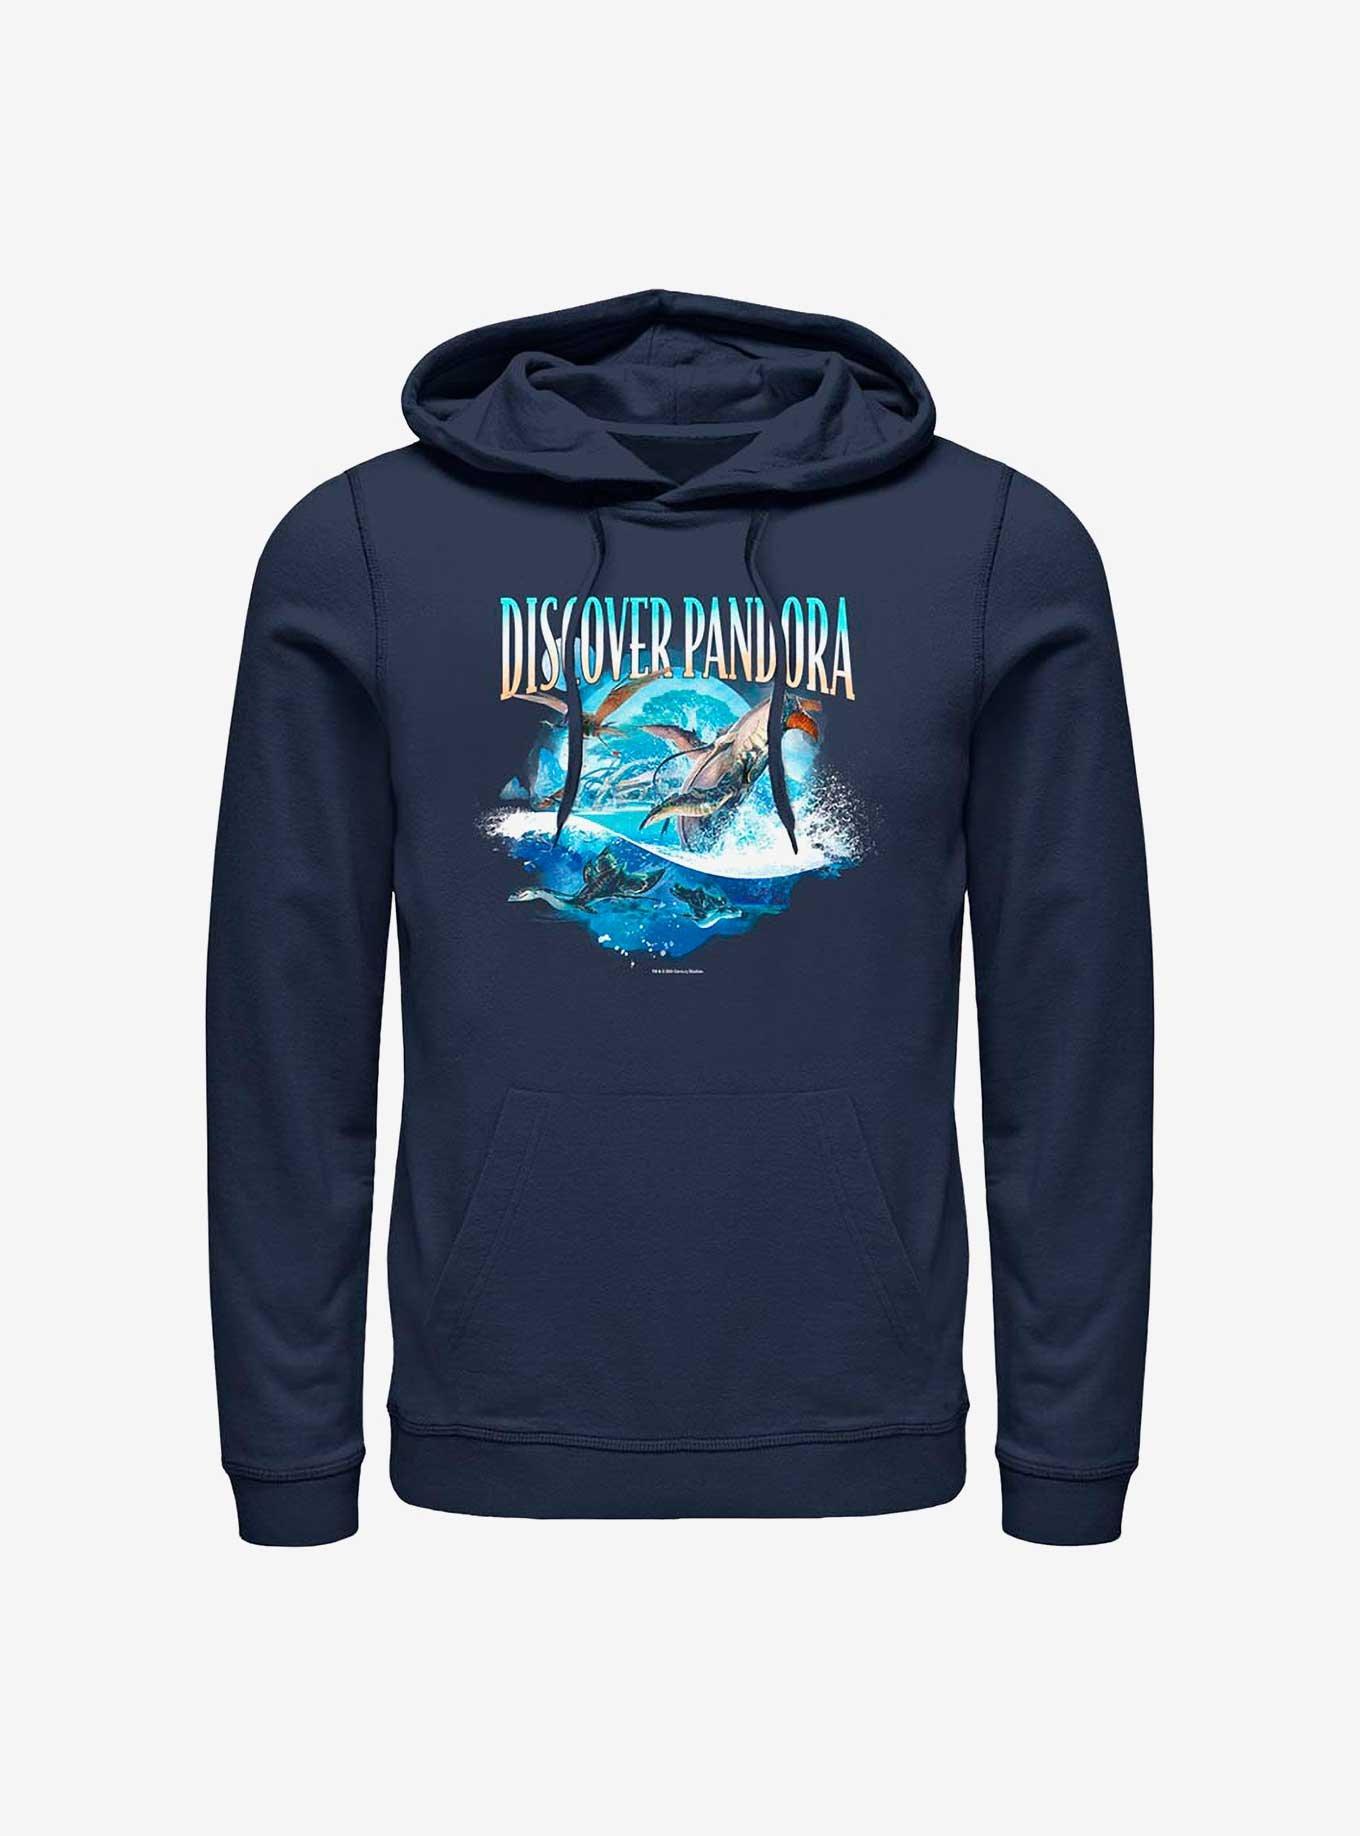 Avatar: The Way of Water Discover Pandora Hoodie, NAVY, hi-res